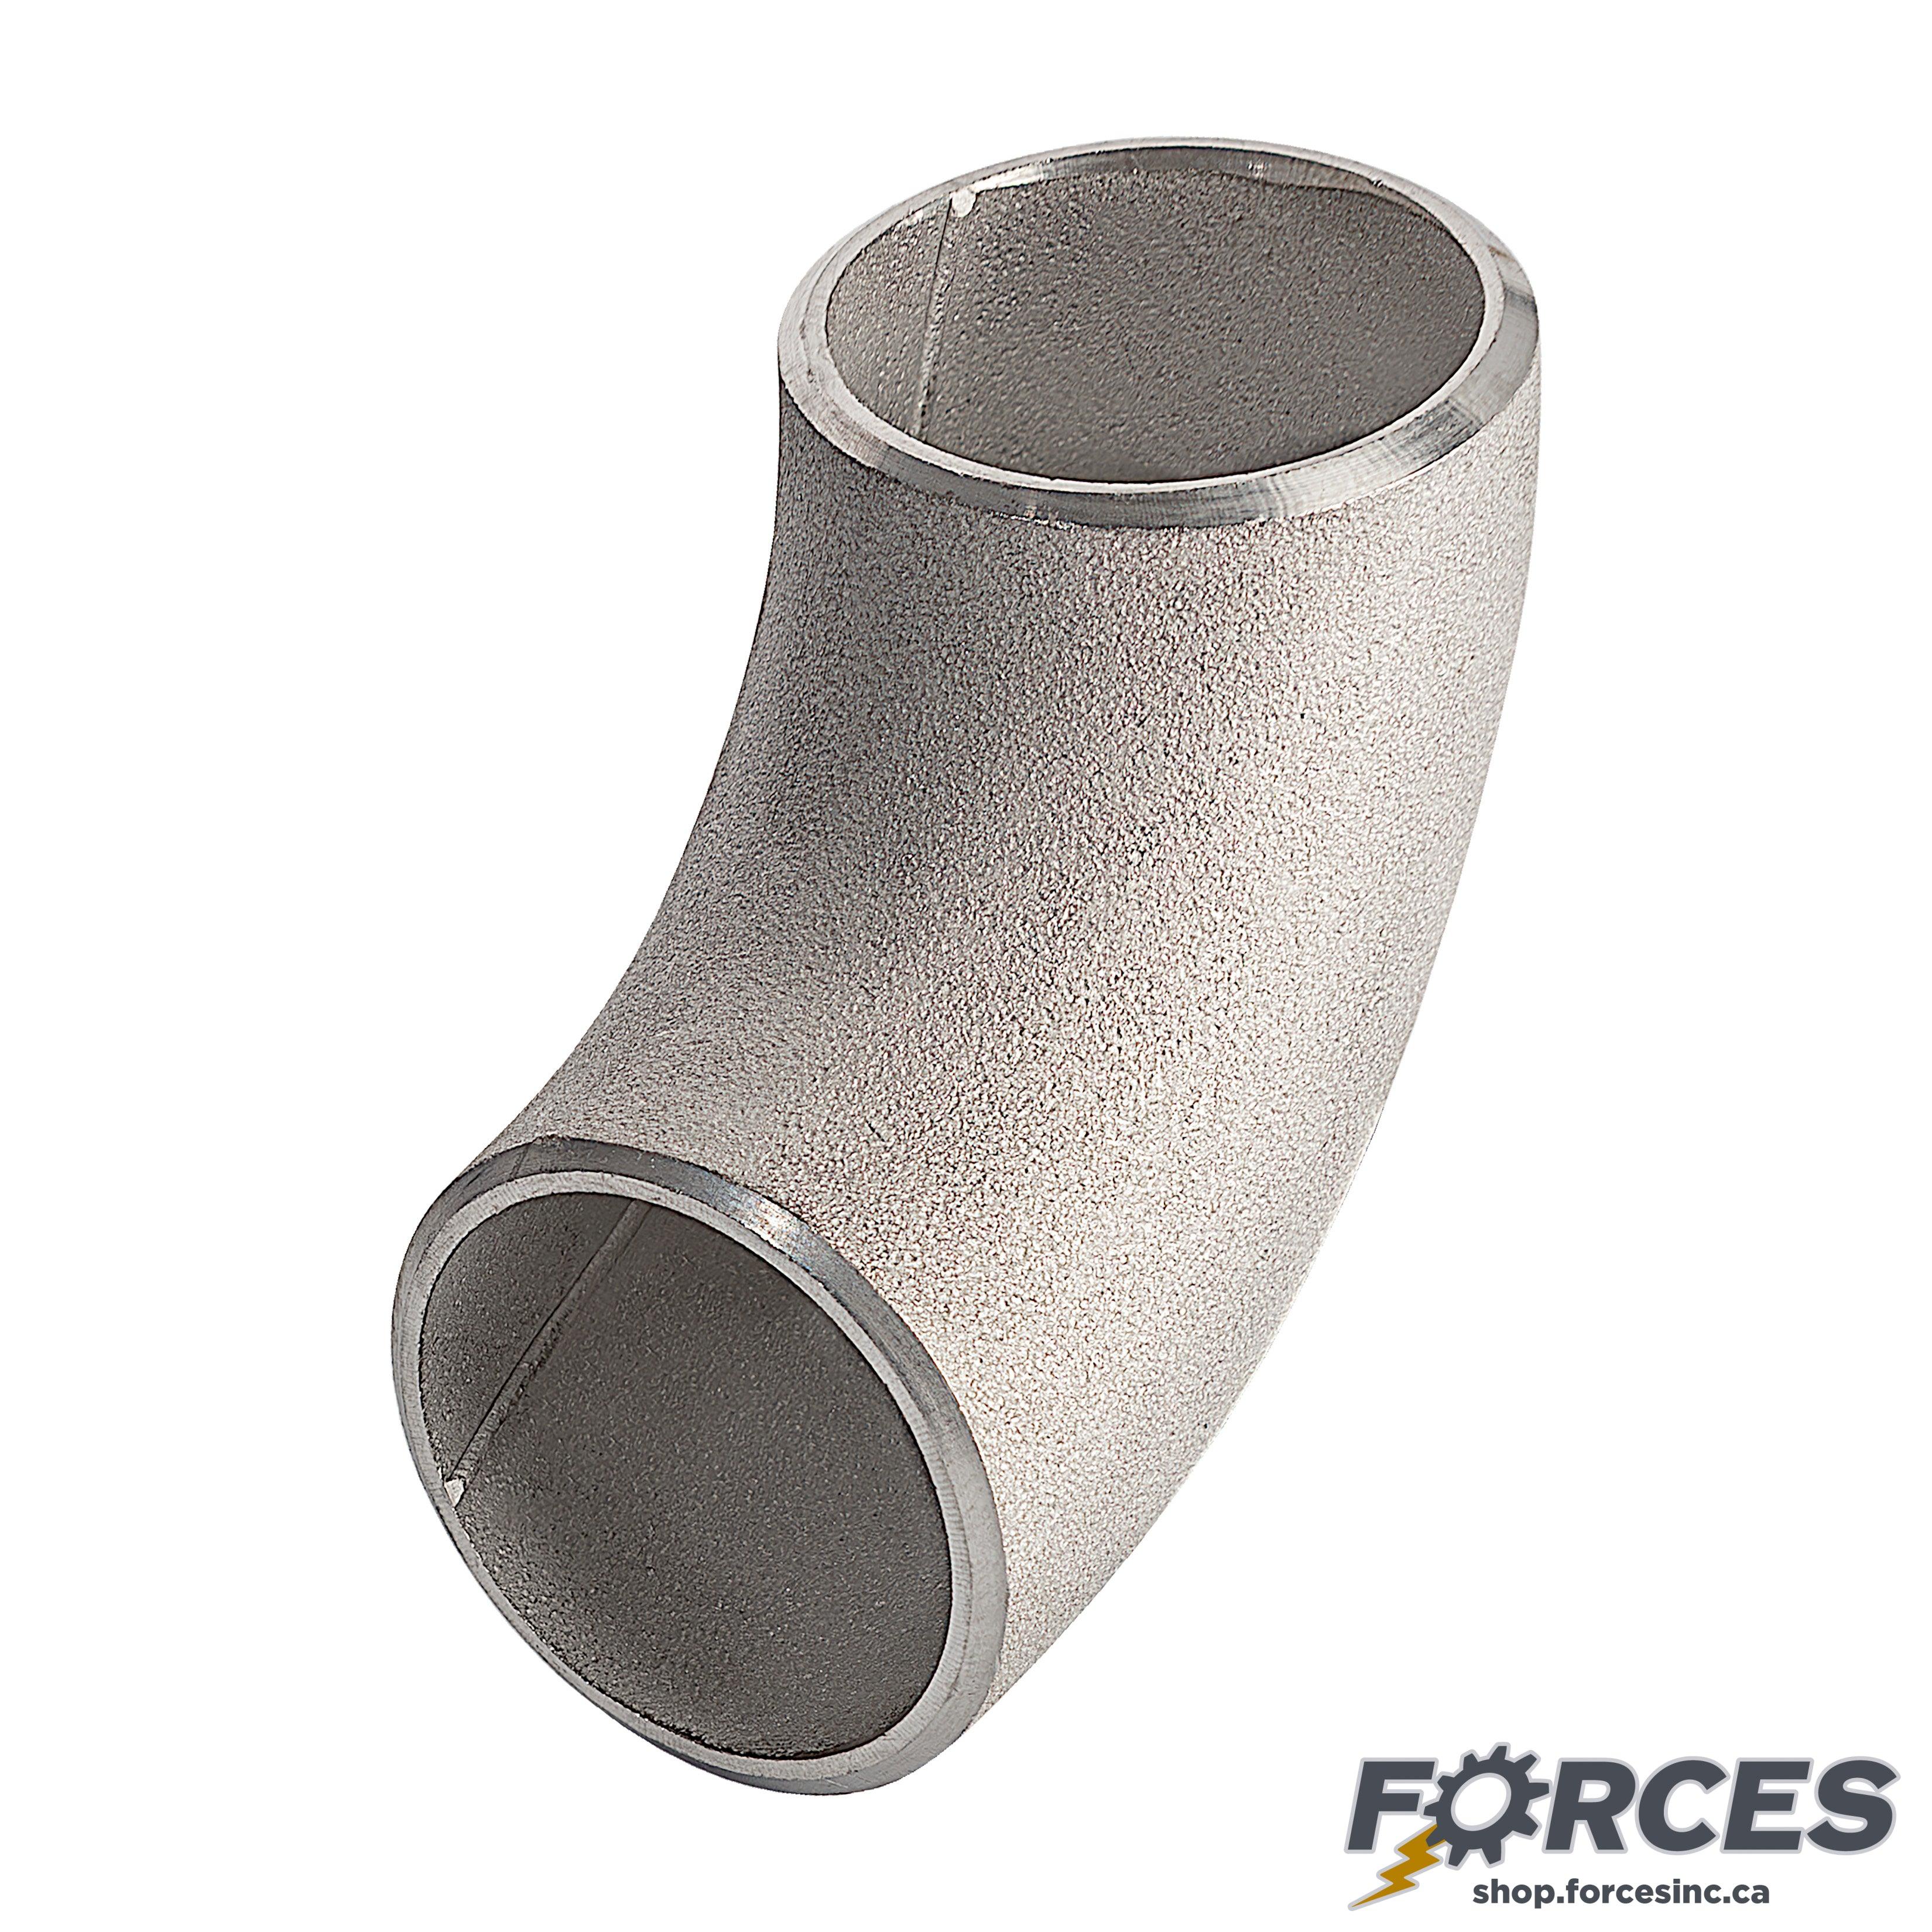 3/4" Elbow 90° SCH 40 Butt Weld - Stainless Steel 304 - Forces Inc